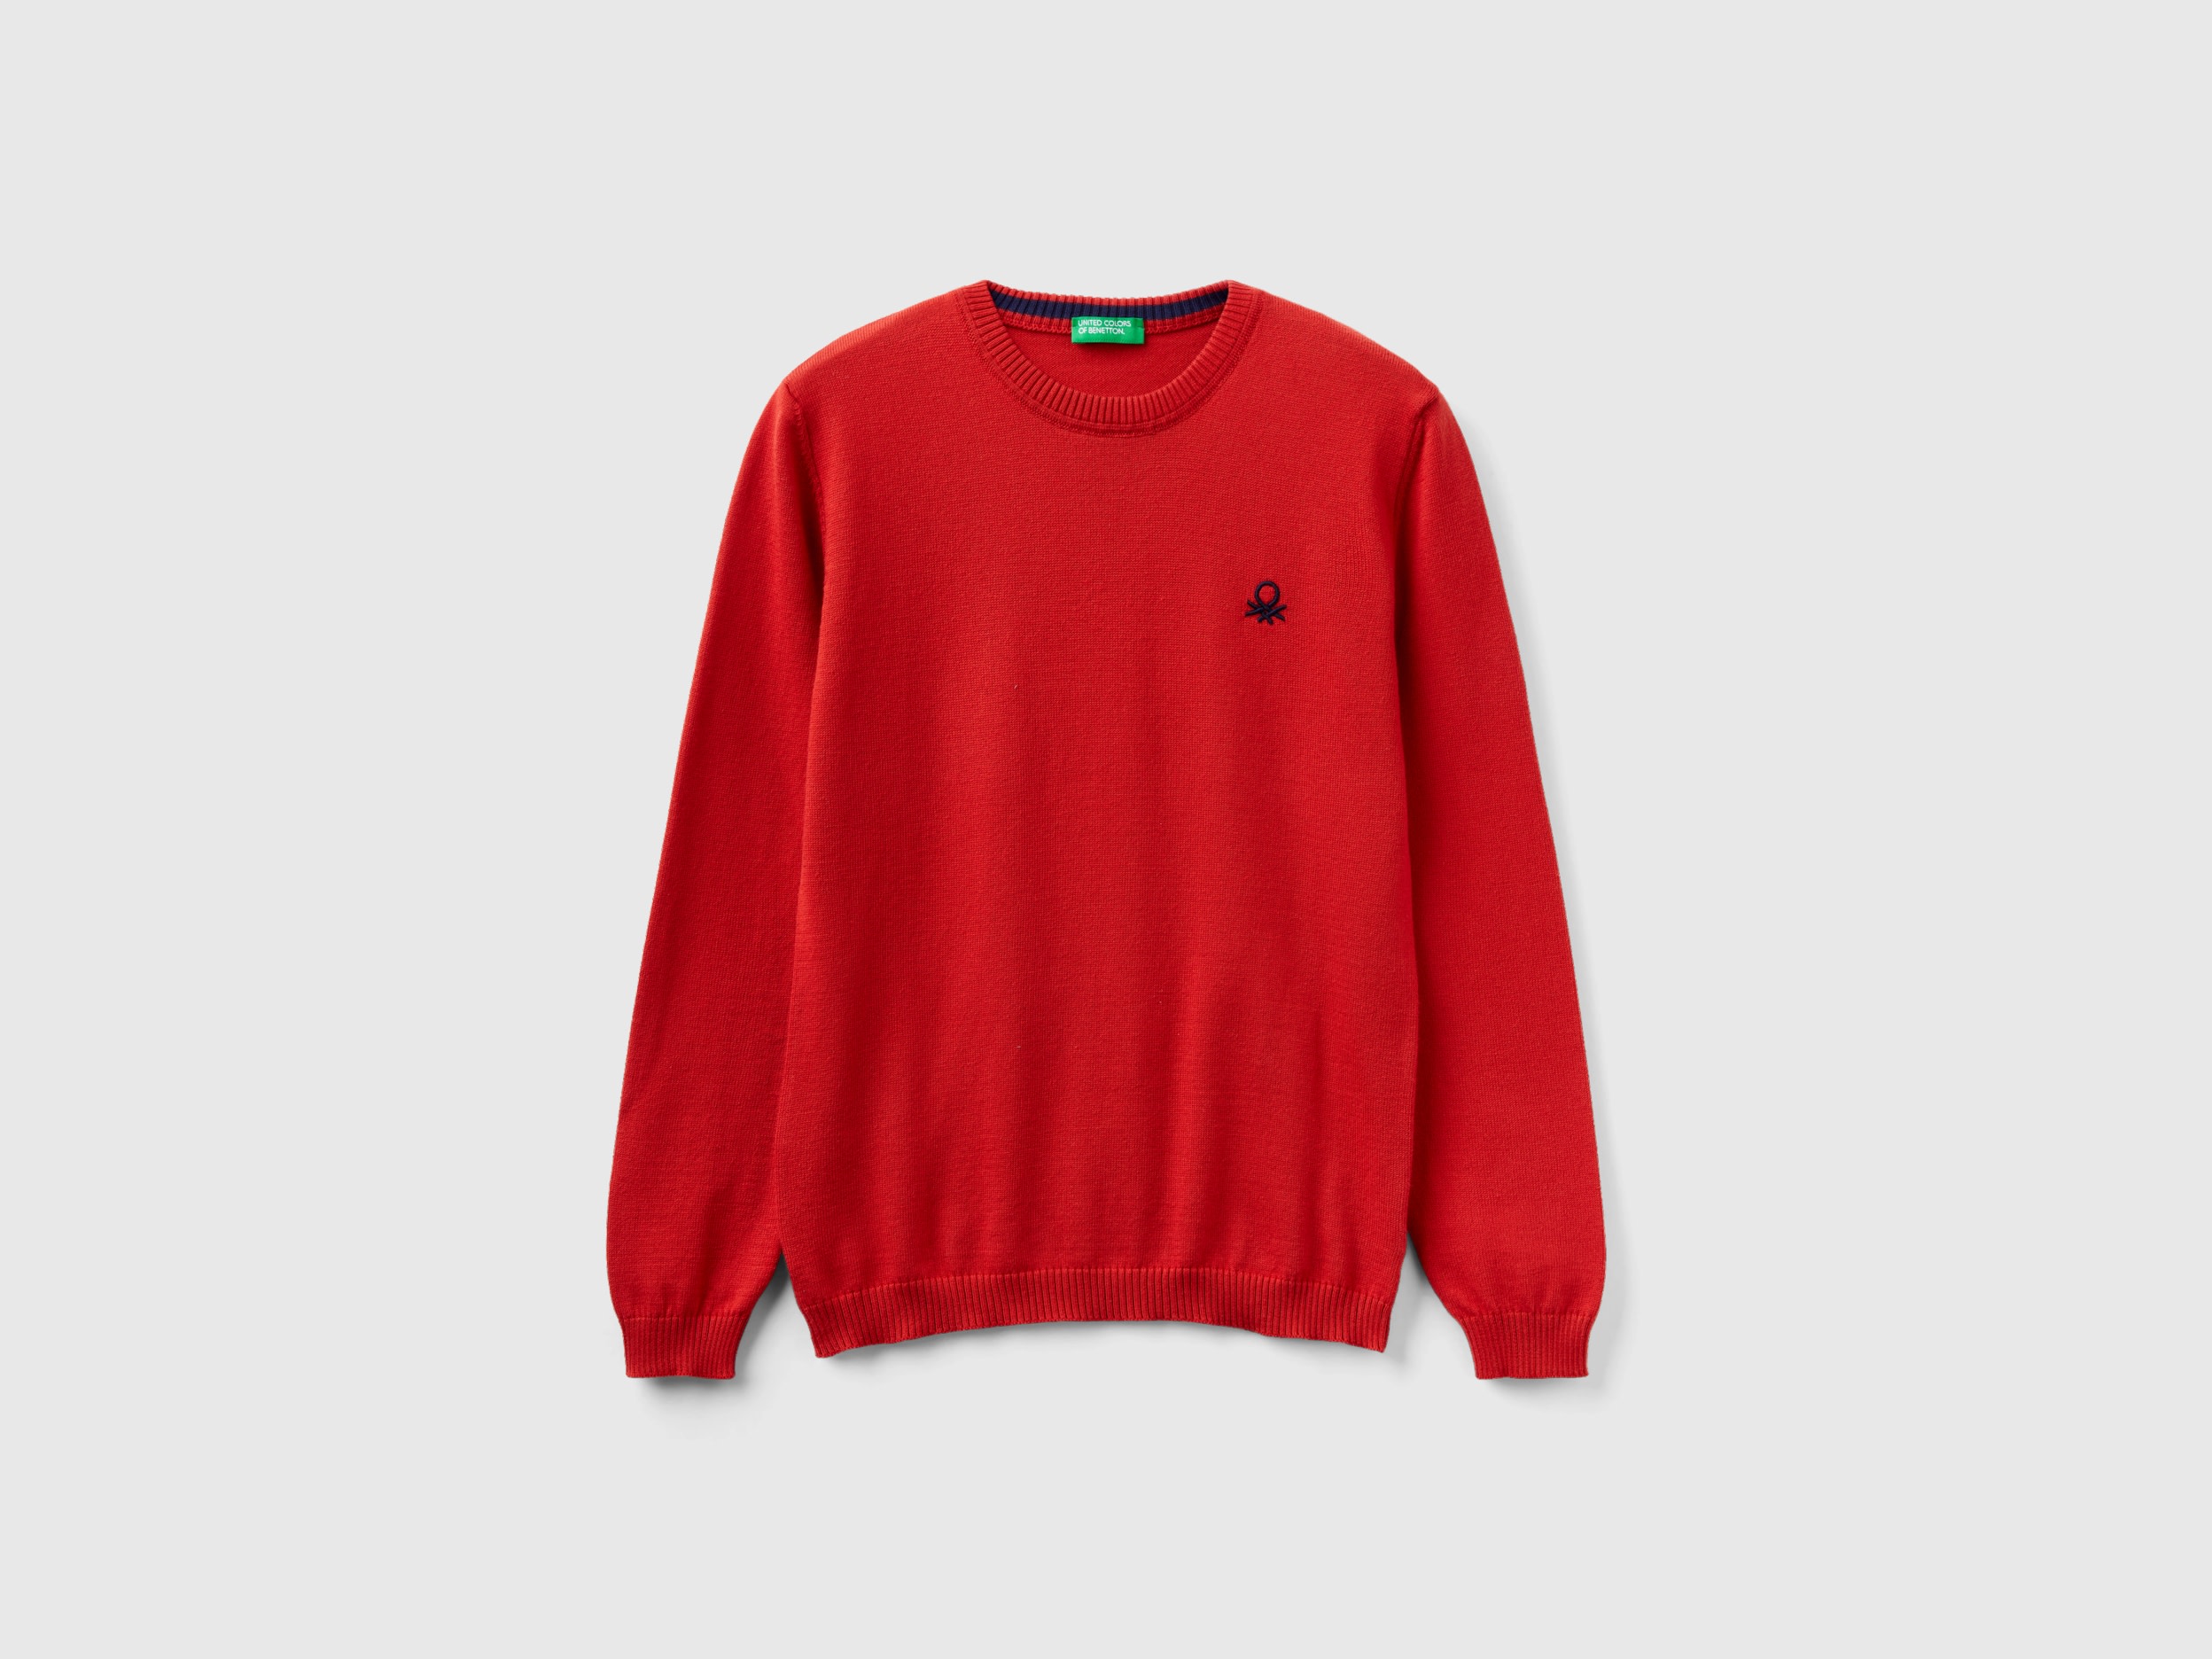 Benetton, Sweater In Pure Cotton With Logo, size 2XL, Brick Red, Kids